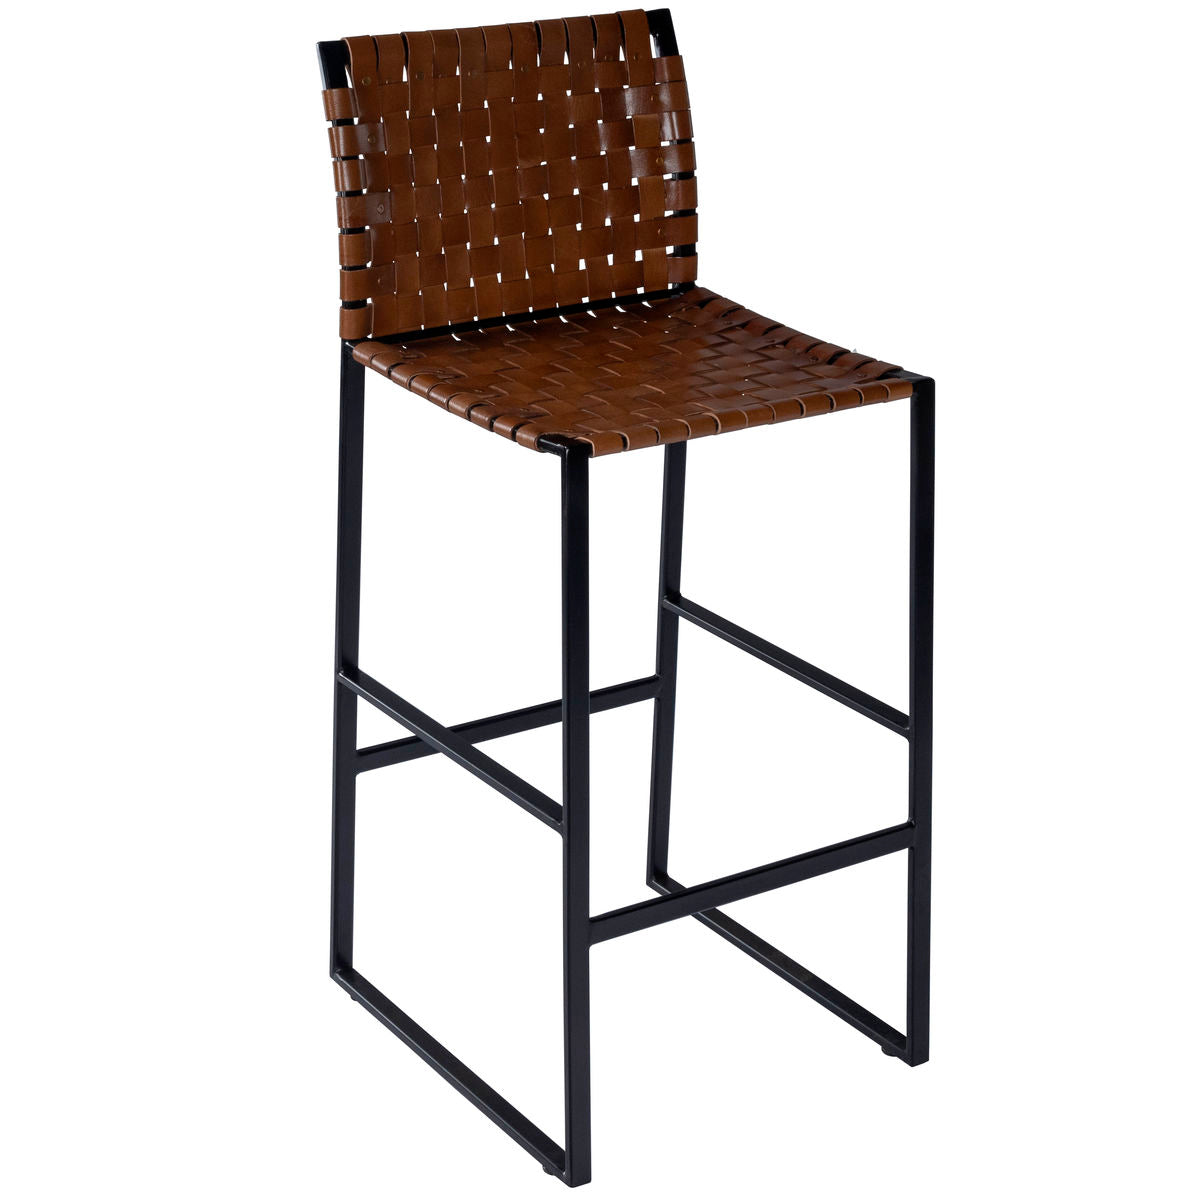 5445344 Butler-Industrial Chic Bar Stool Antique Gold Finish